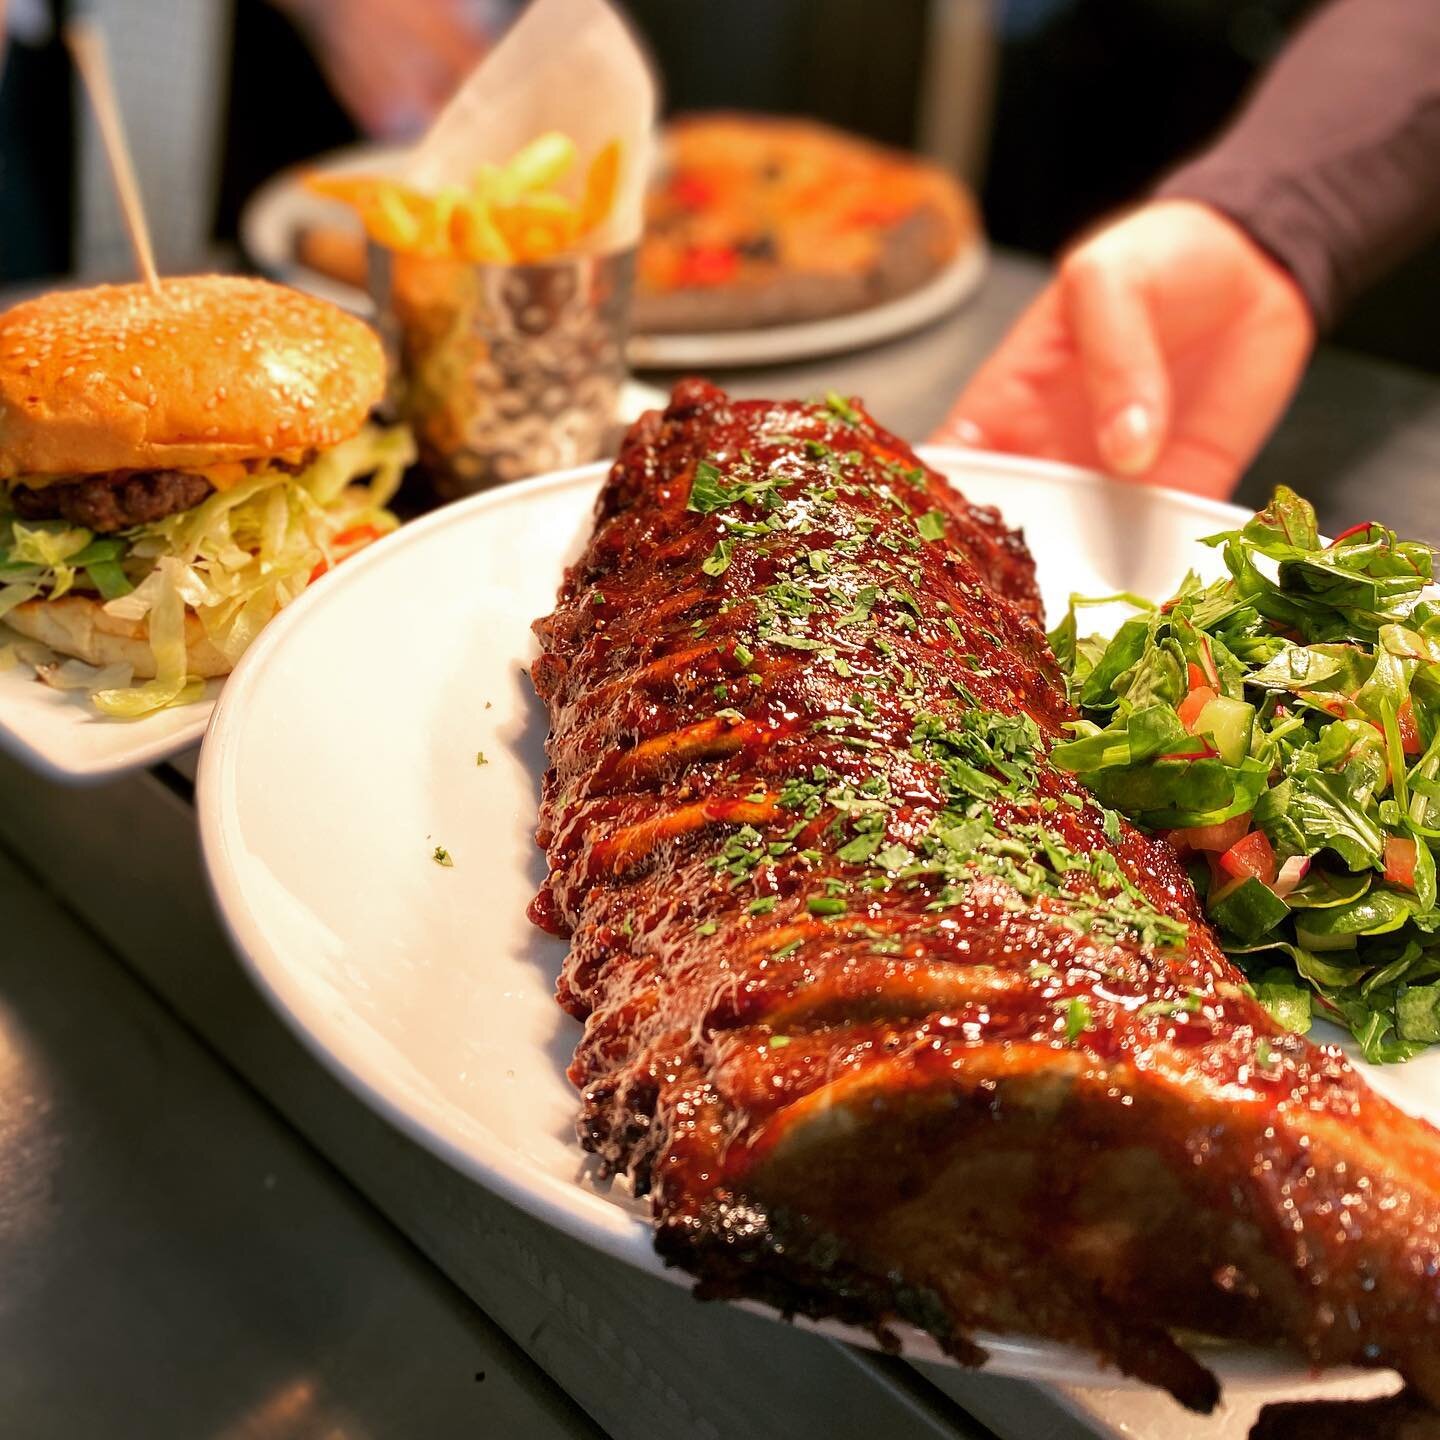 New to the menu and flying out of the kitchen, our new Honey &amp; Hoisin Ribs, available as half or whole rack (starter/main). Wiltshire Pork Ribs from our local butcher 💪 #Ribs #babybackribs #pork #porkribs #greenprkbraz #eatlocal #bathuk #bathiso